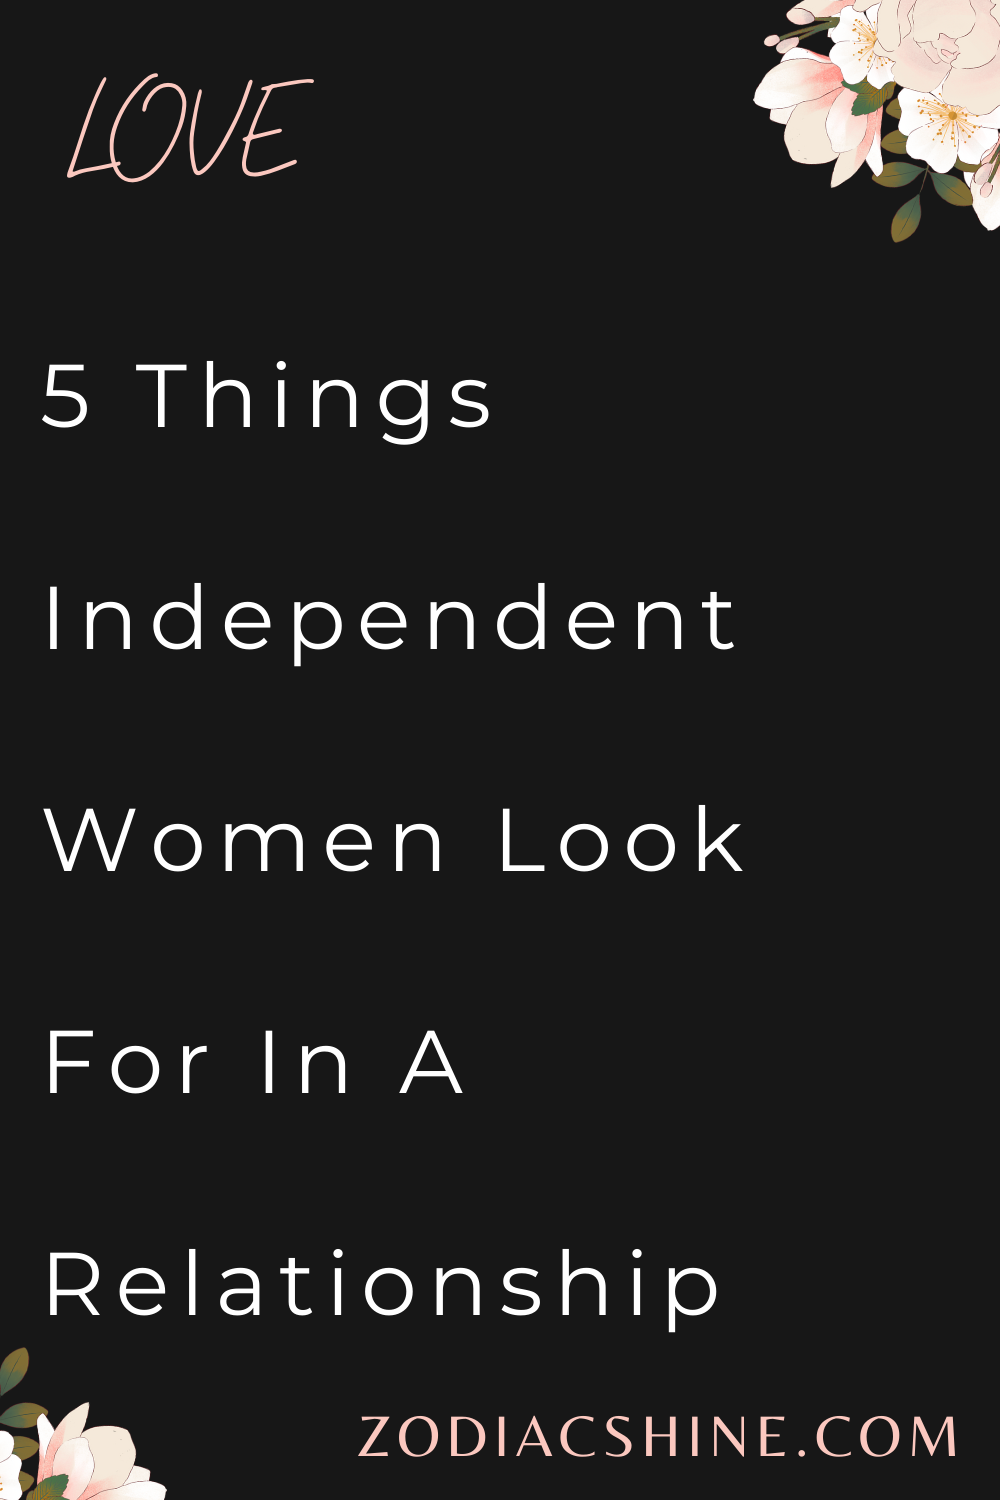 5 Things Independent Women Look For In A Relationship